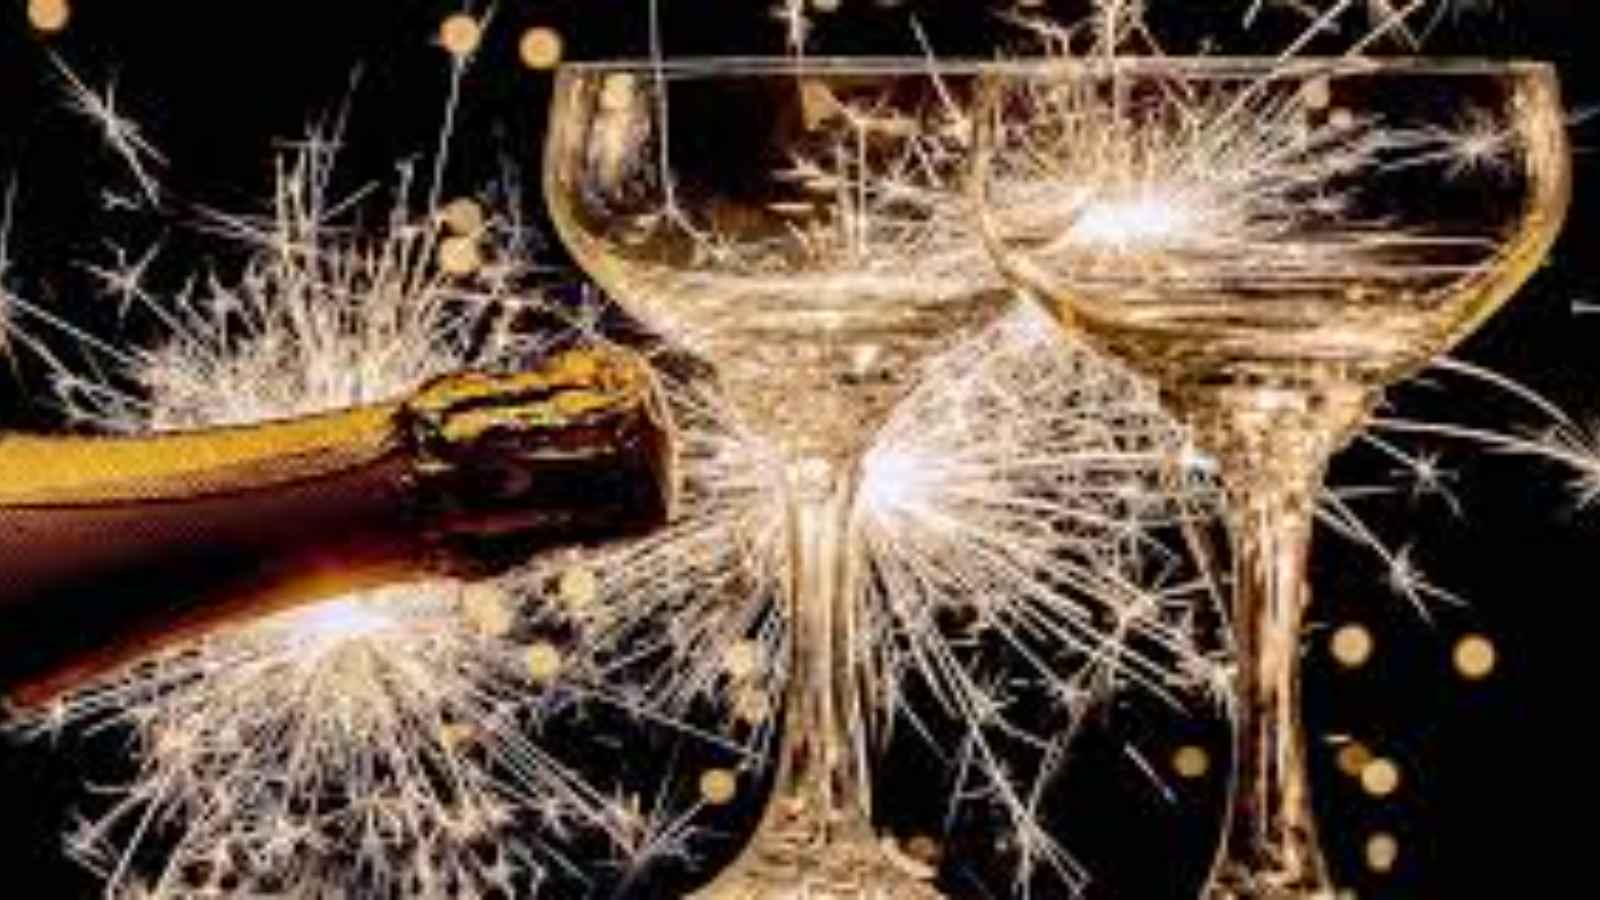 National Champagne Day 2022: Date, History and Different Types of Champagne